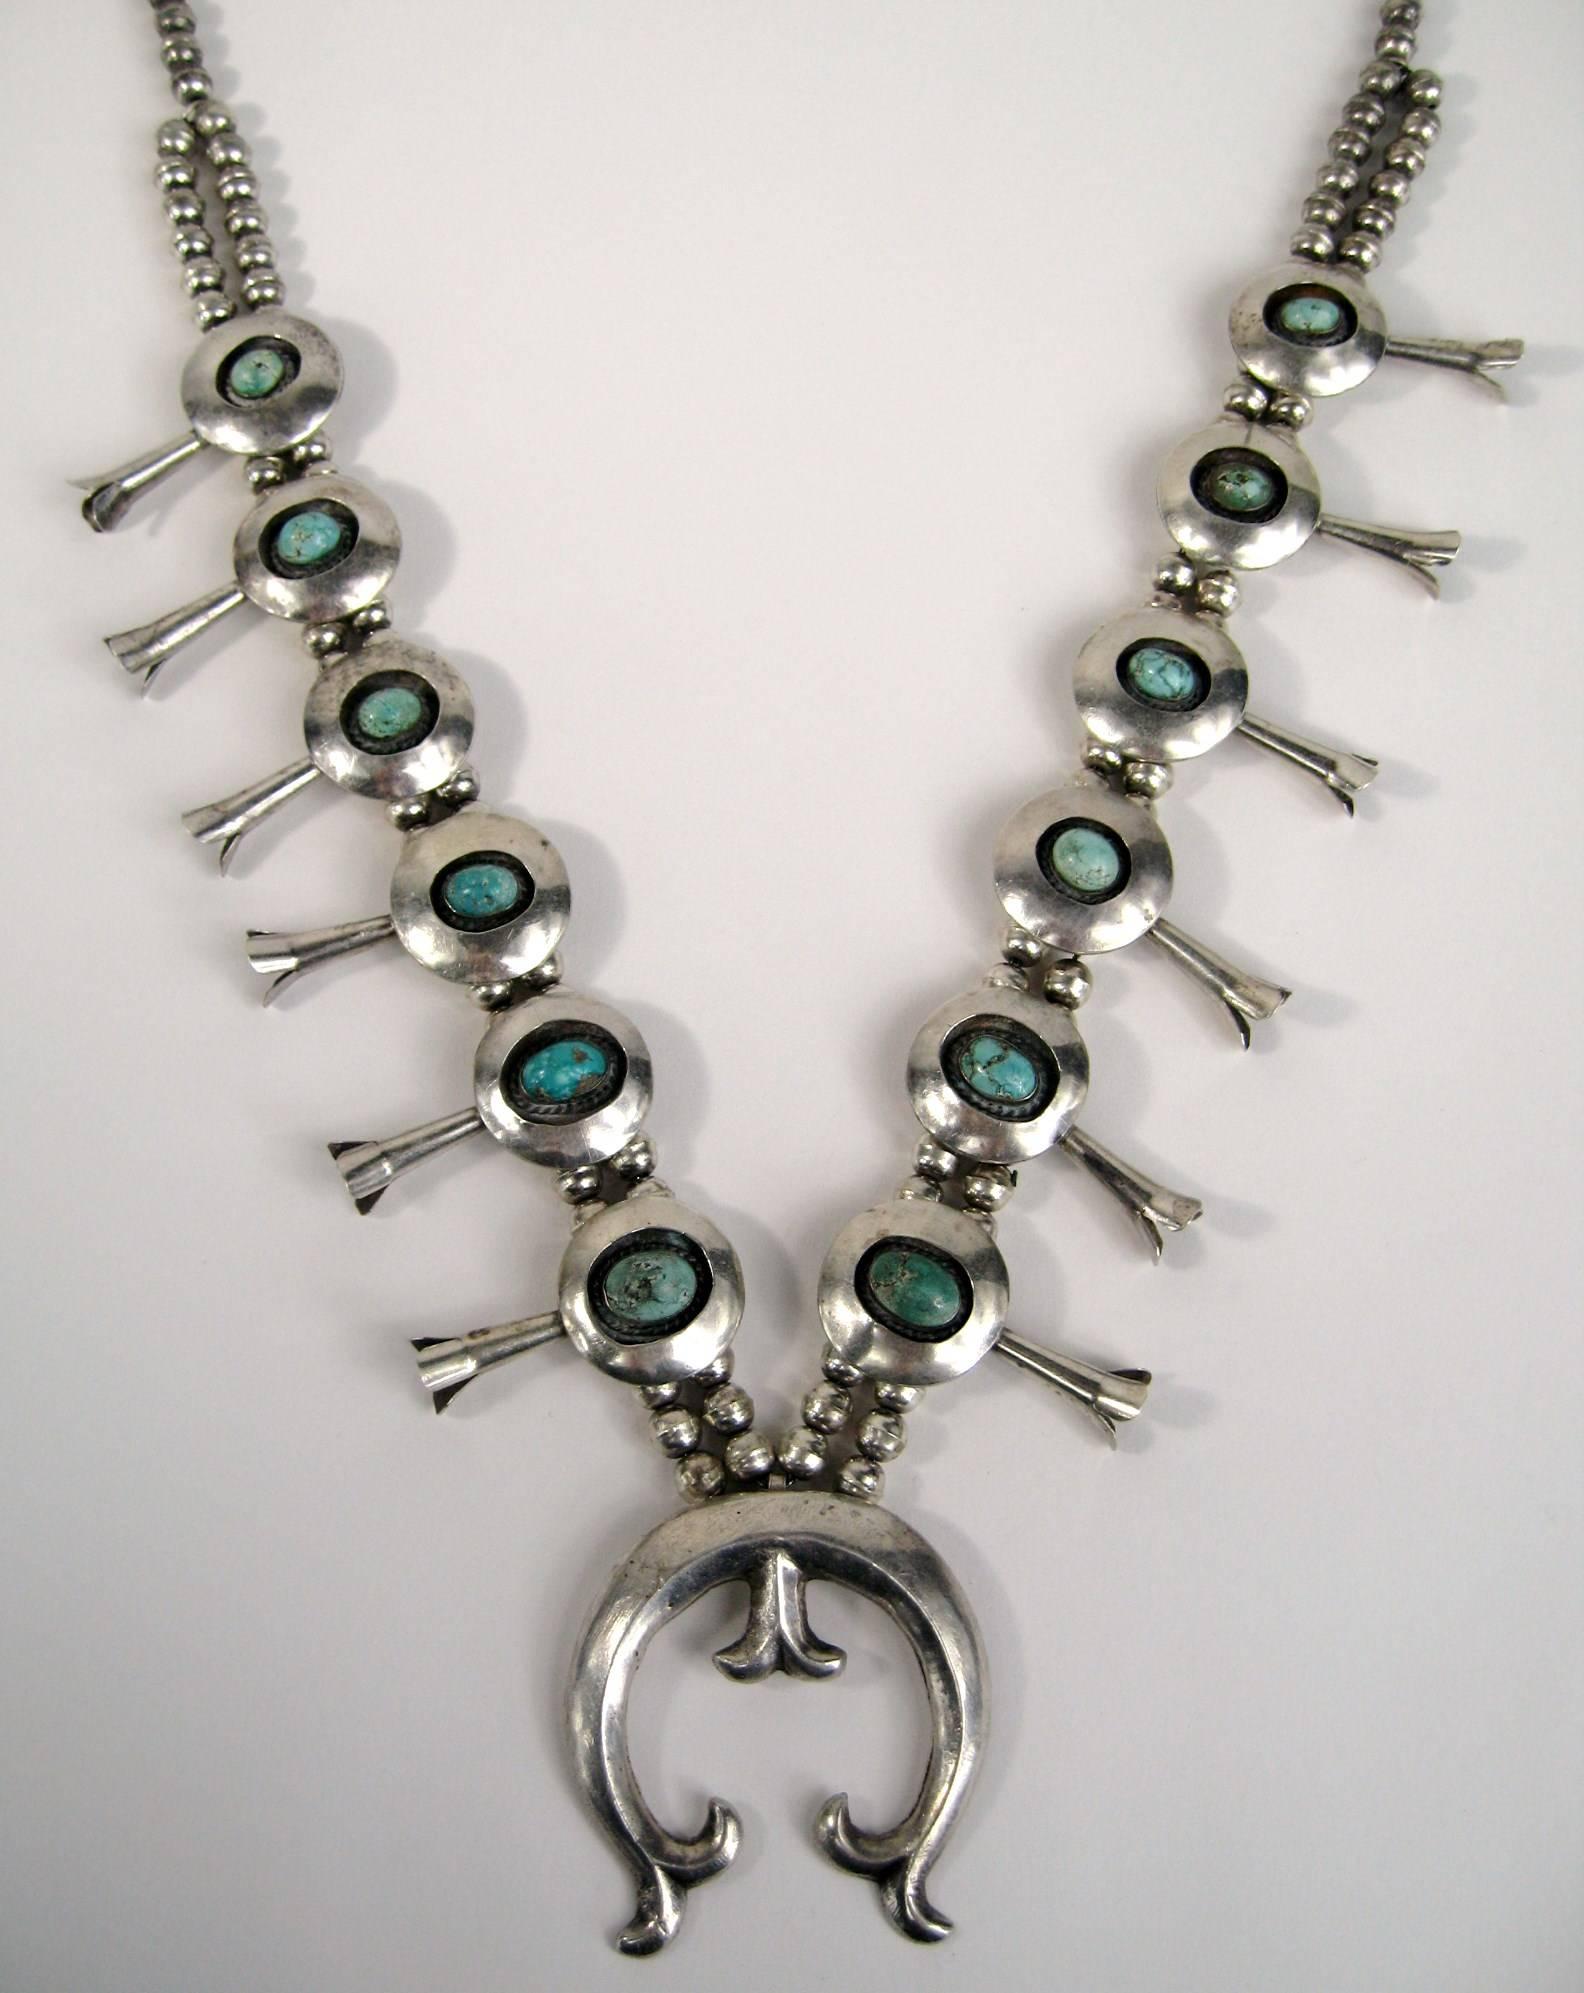 Another stunning Navajo Squash blossom Sterling silver necklace. Shadow box set turquoise stones totaling 12. Naja at the bottom measuring 2.23 inches x 2.15 inches - Blossoms are 1.79 inches long on Double beaded chain that graduates to a single